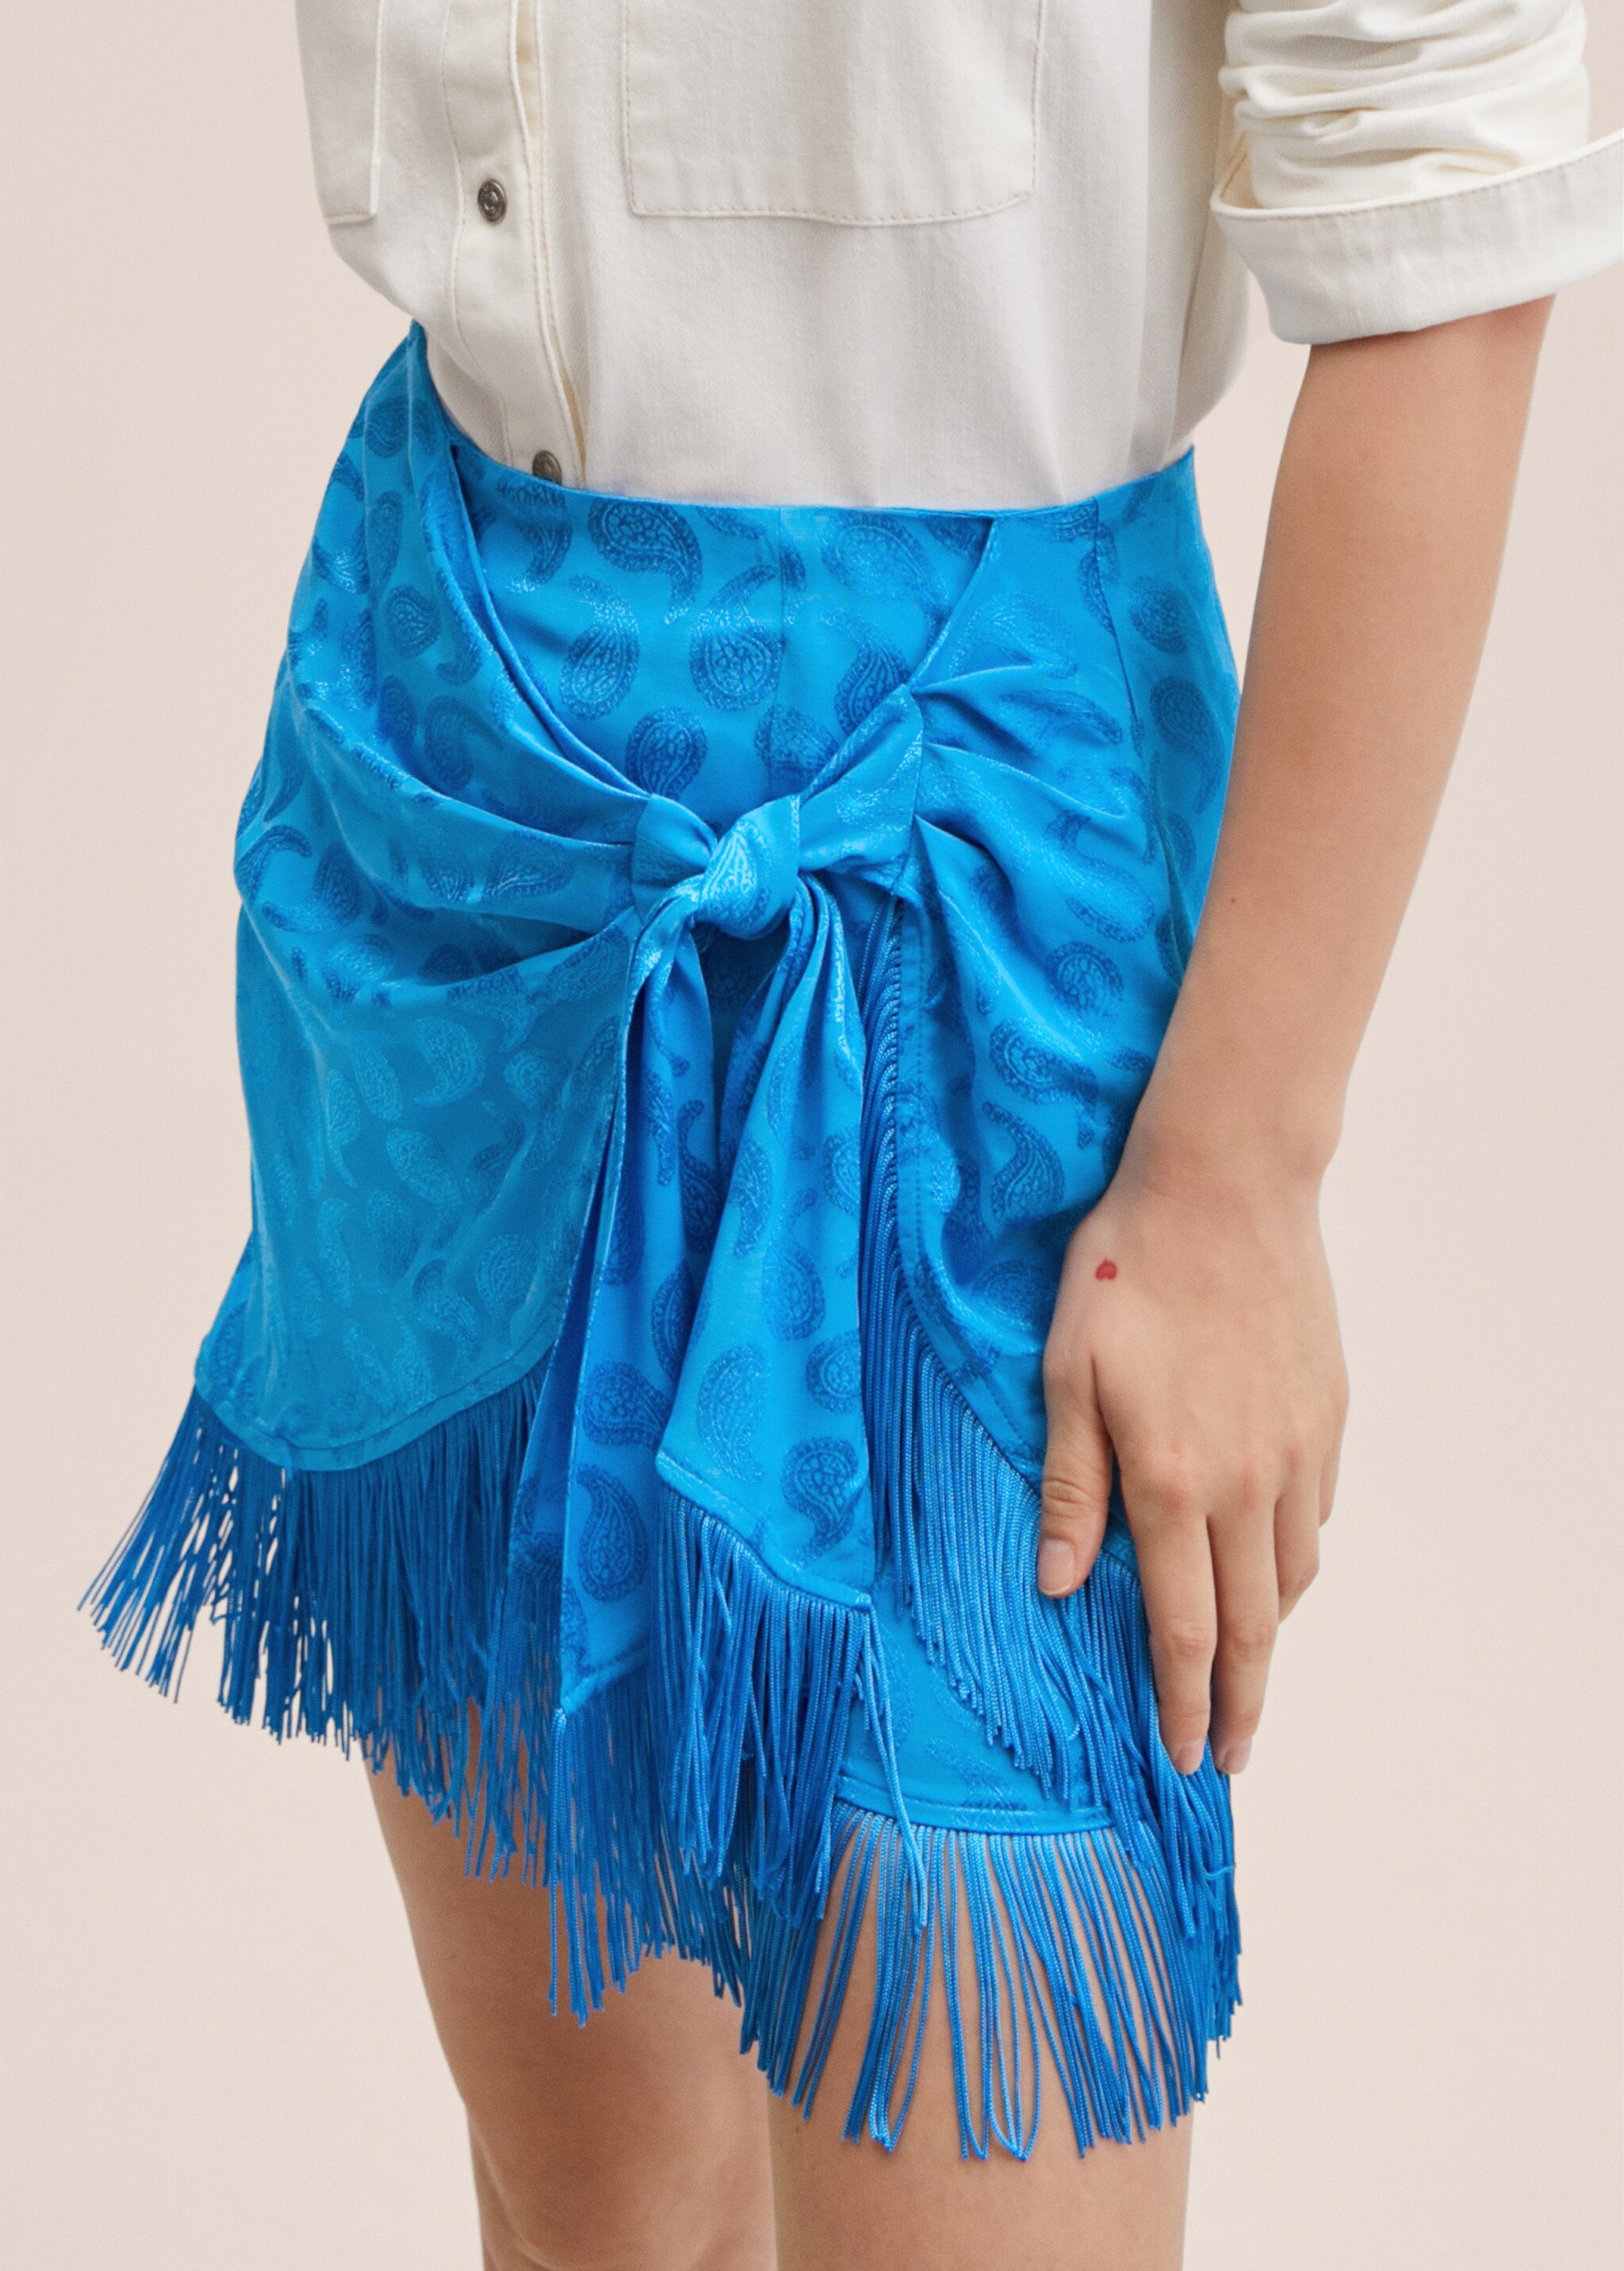 Fringed miniskirt - Details of the article 1